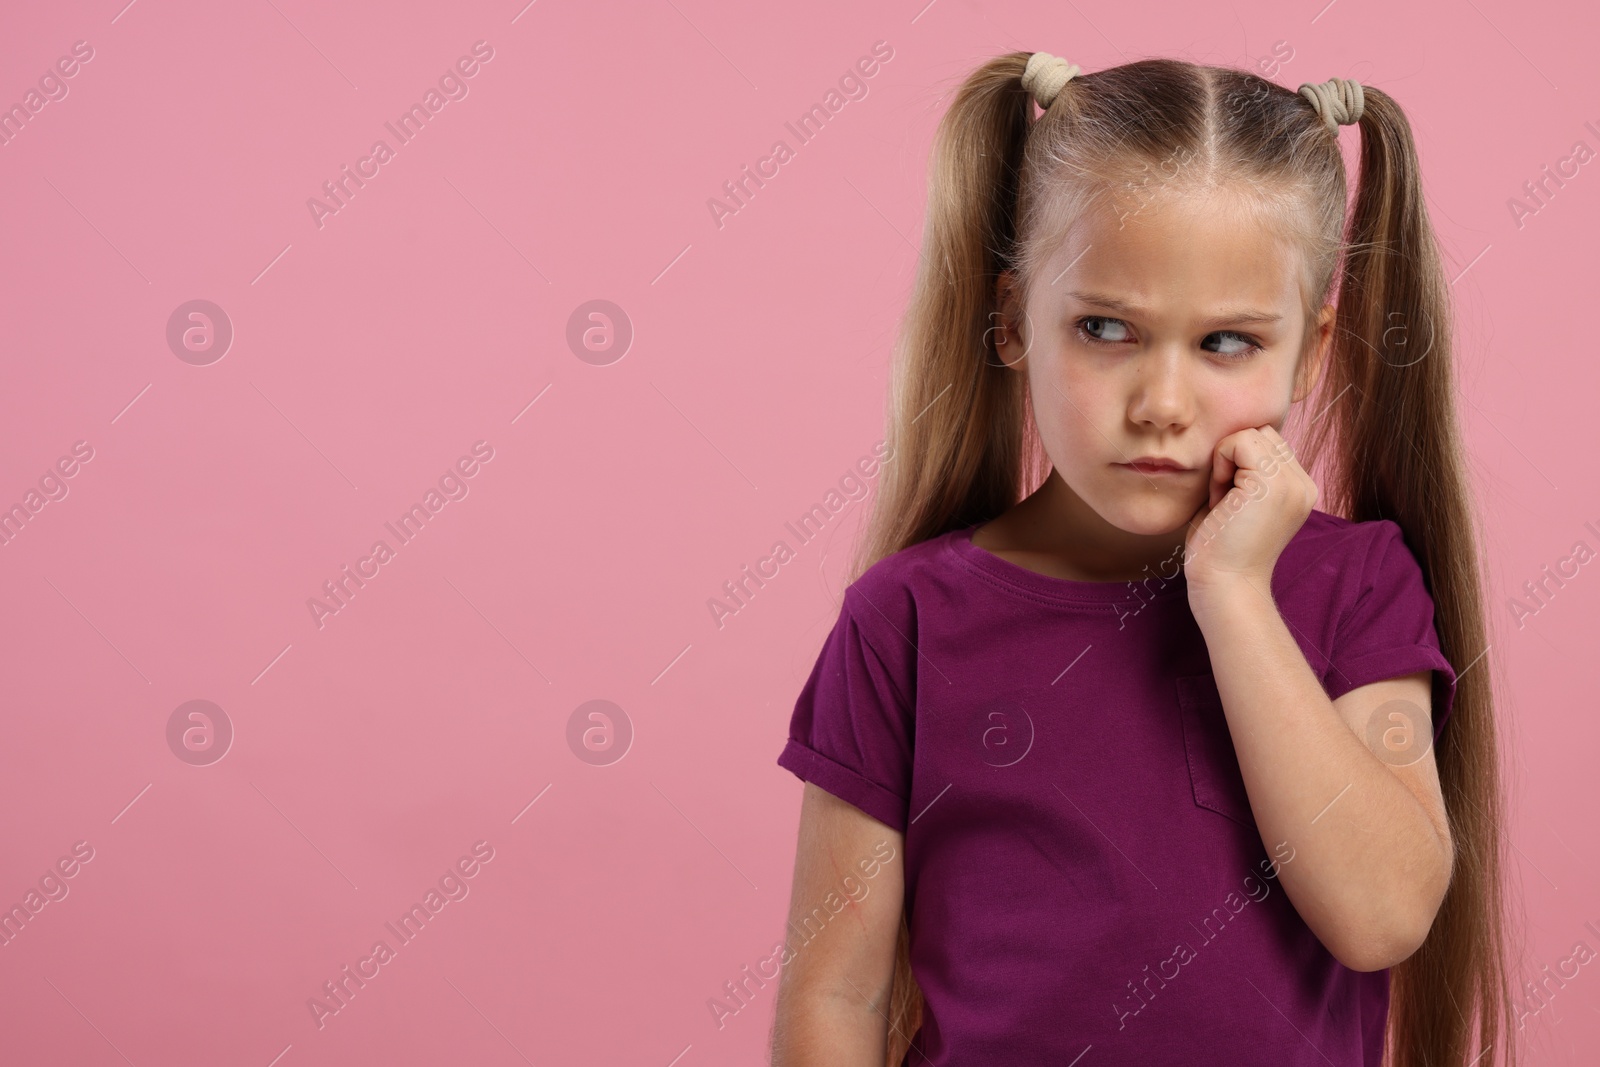 Photo of Resentful girl on pink background. Space for text